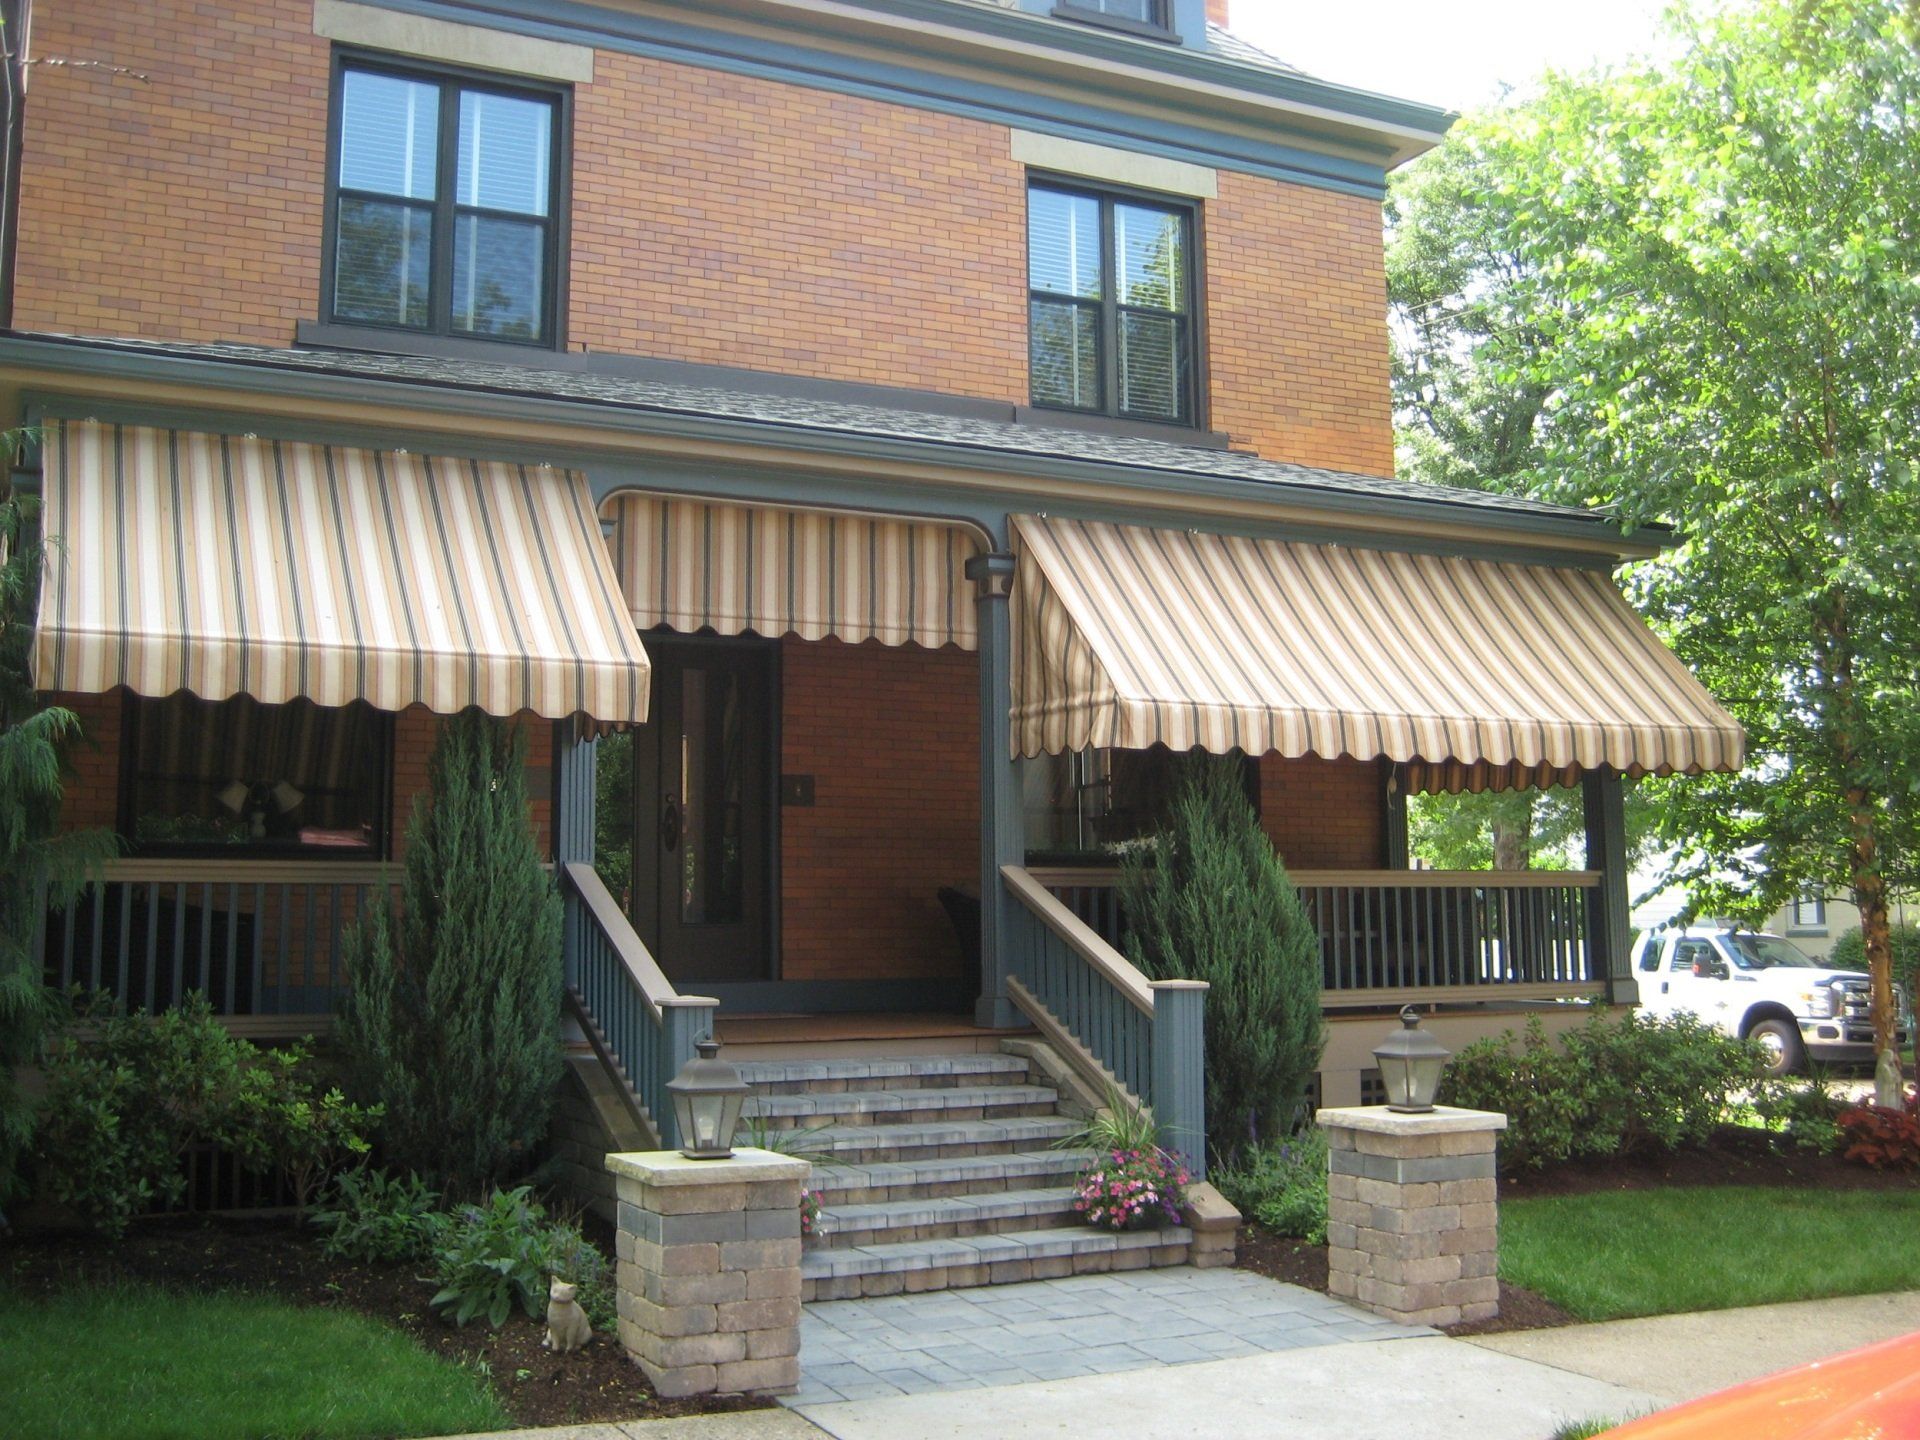 Residential awning-81 — Custom awnings in Pittsburgh, PA